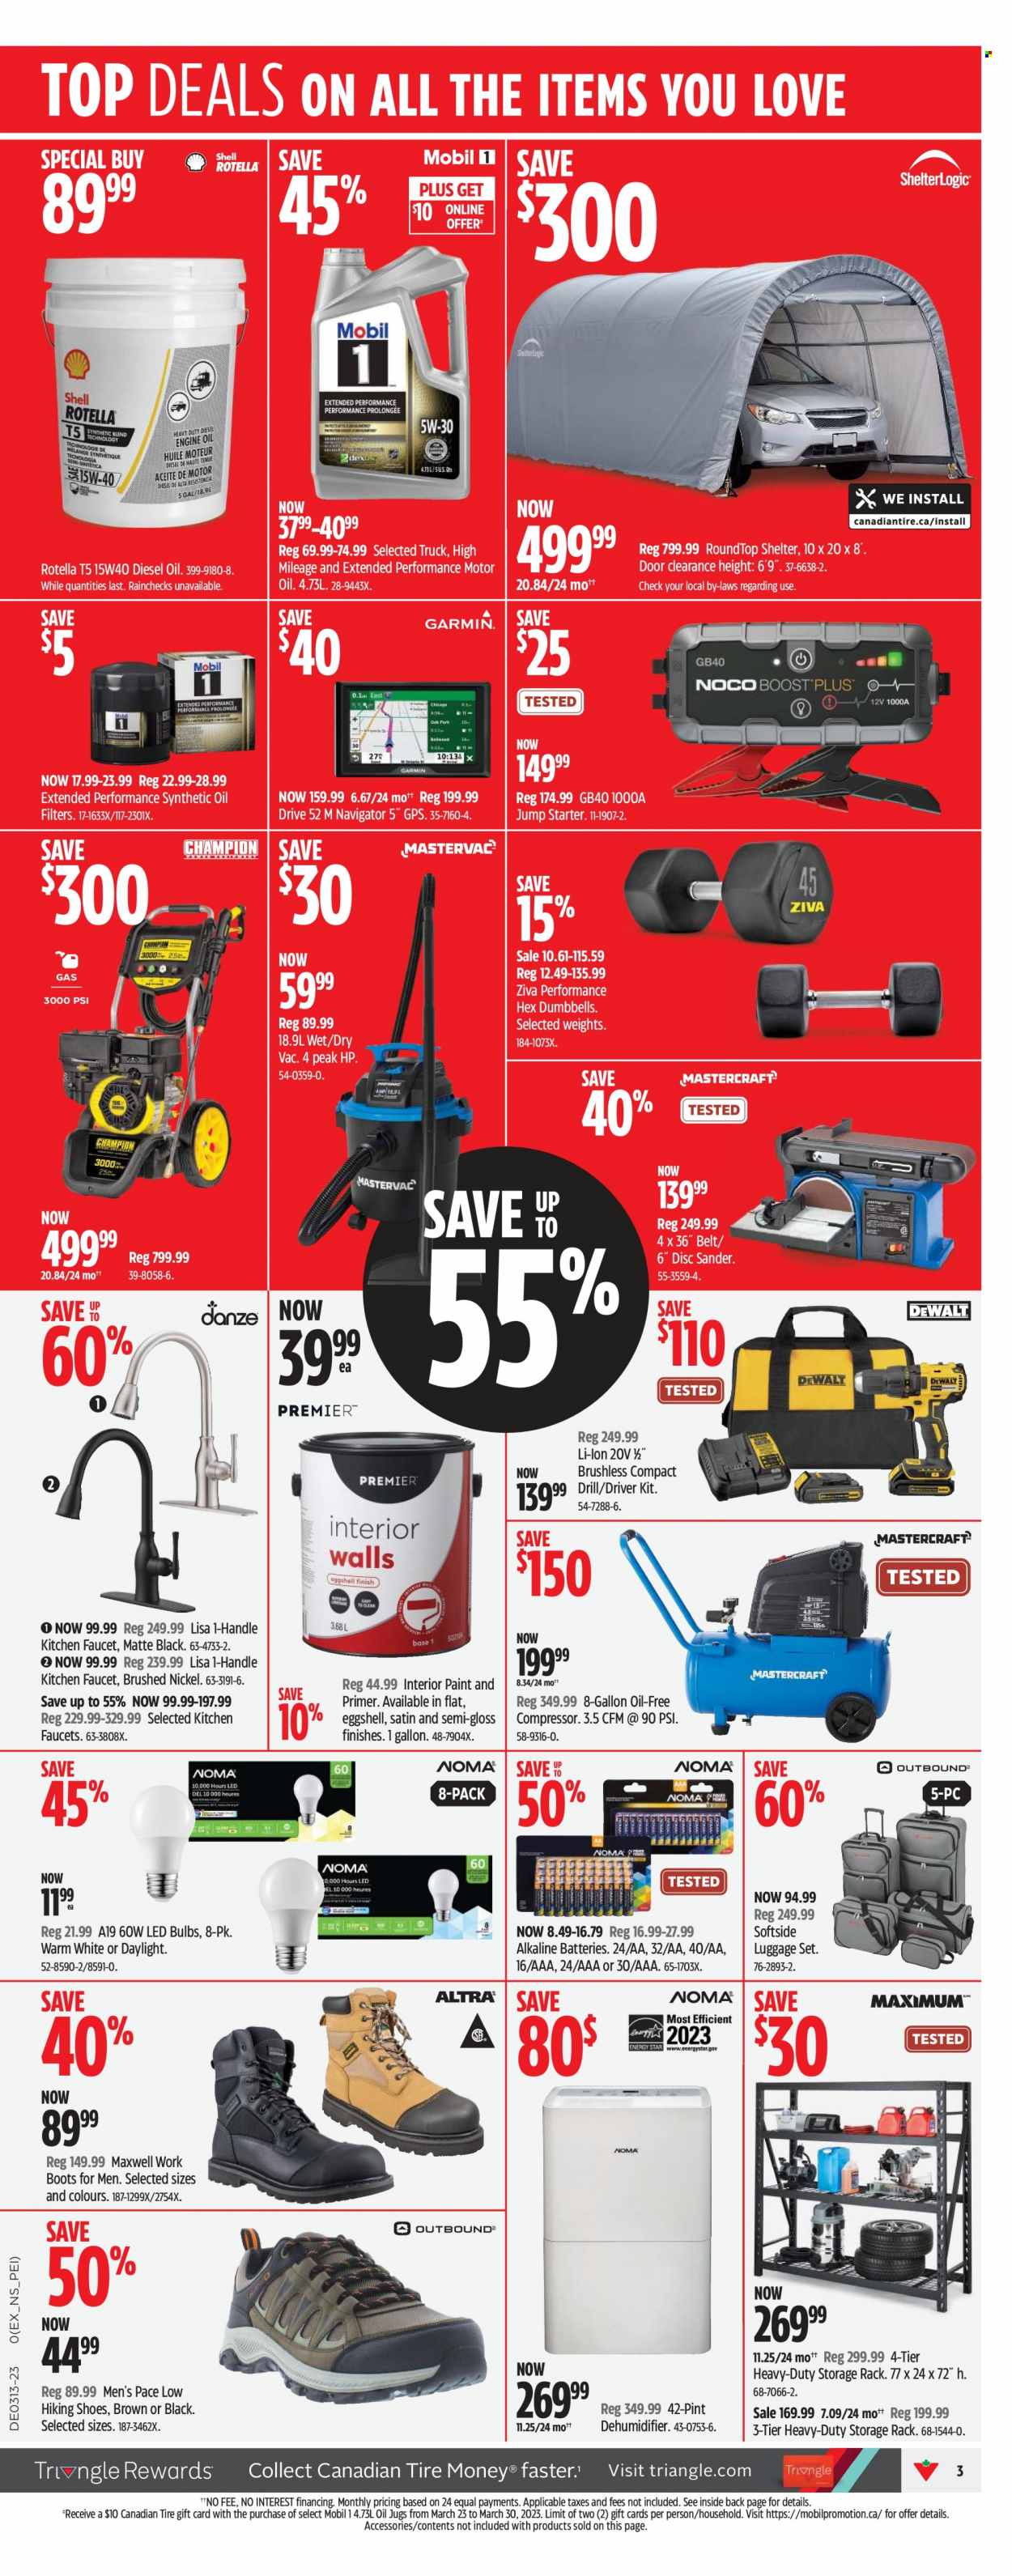 thumbnail - Circulaire Canadian Tire - 23 Mars 2023 - 30 Mars 2023 - Produits soldés - Hewlett Packard, boots. Page 3.